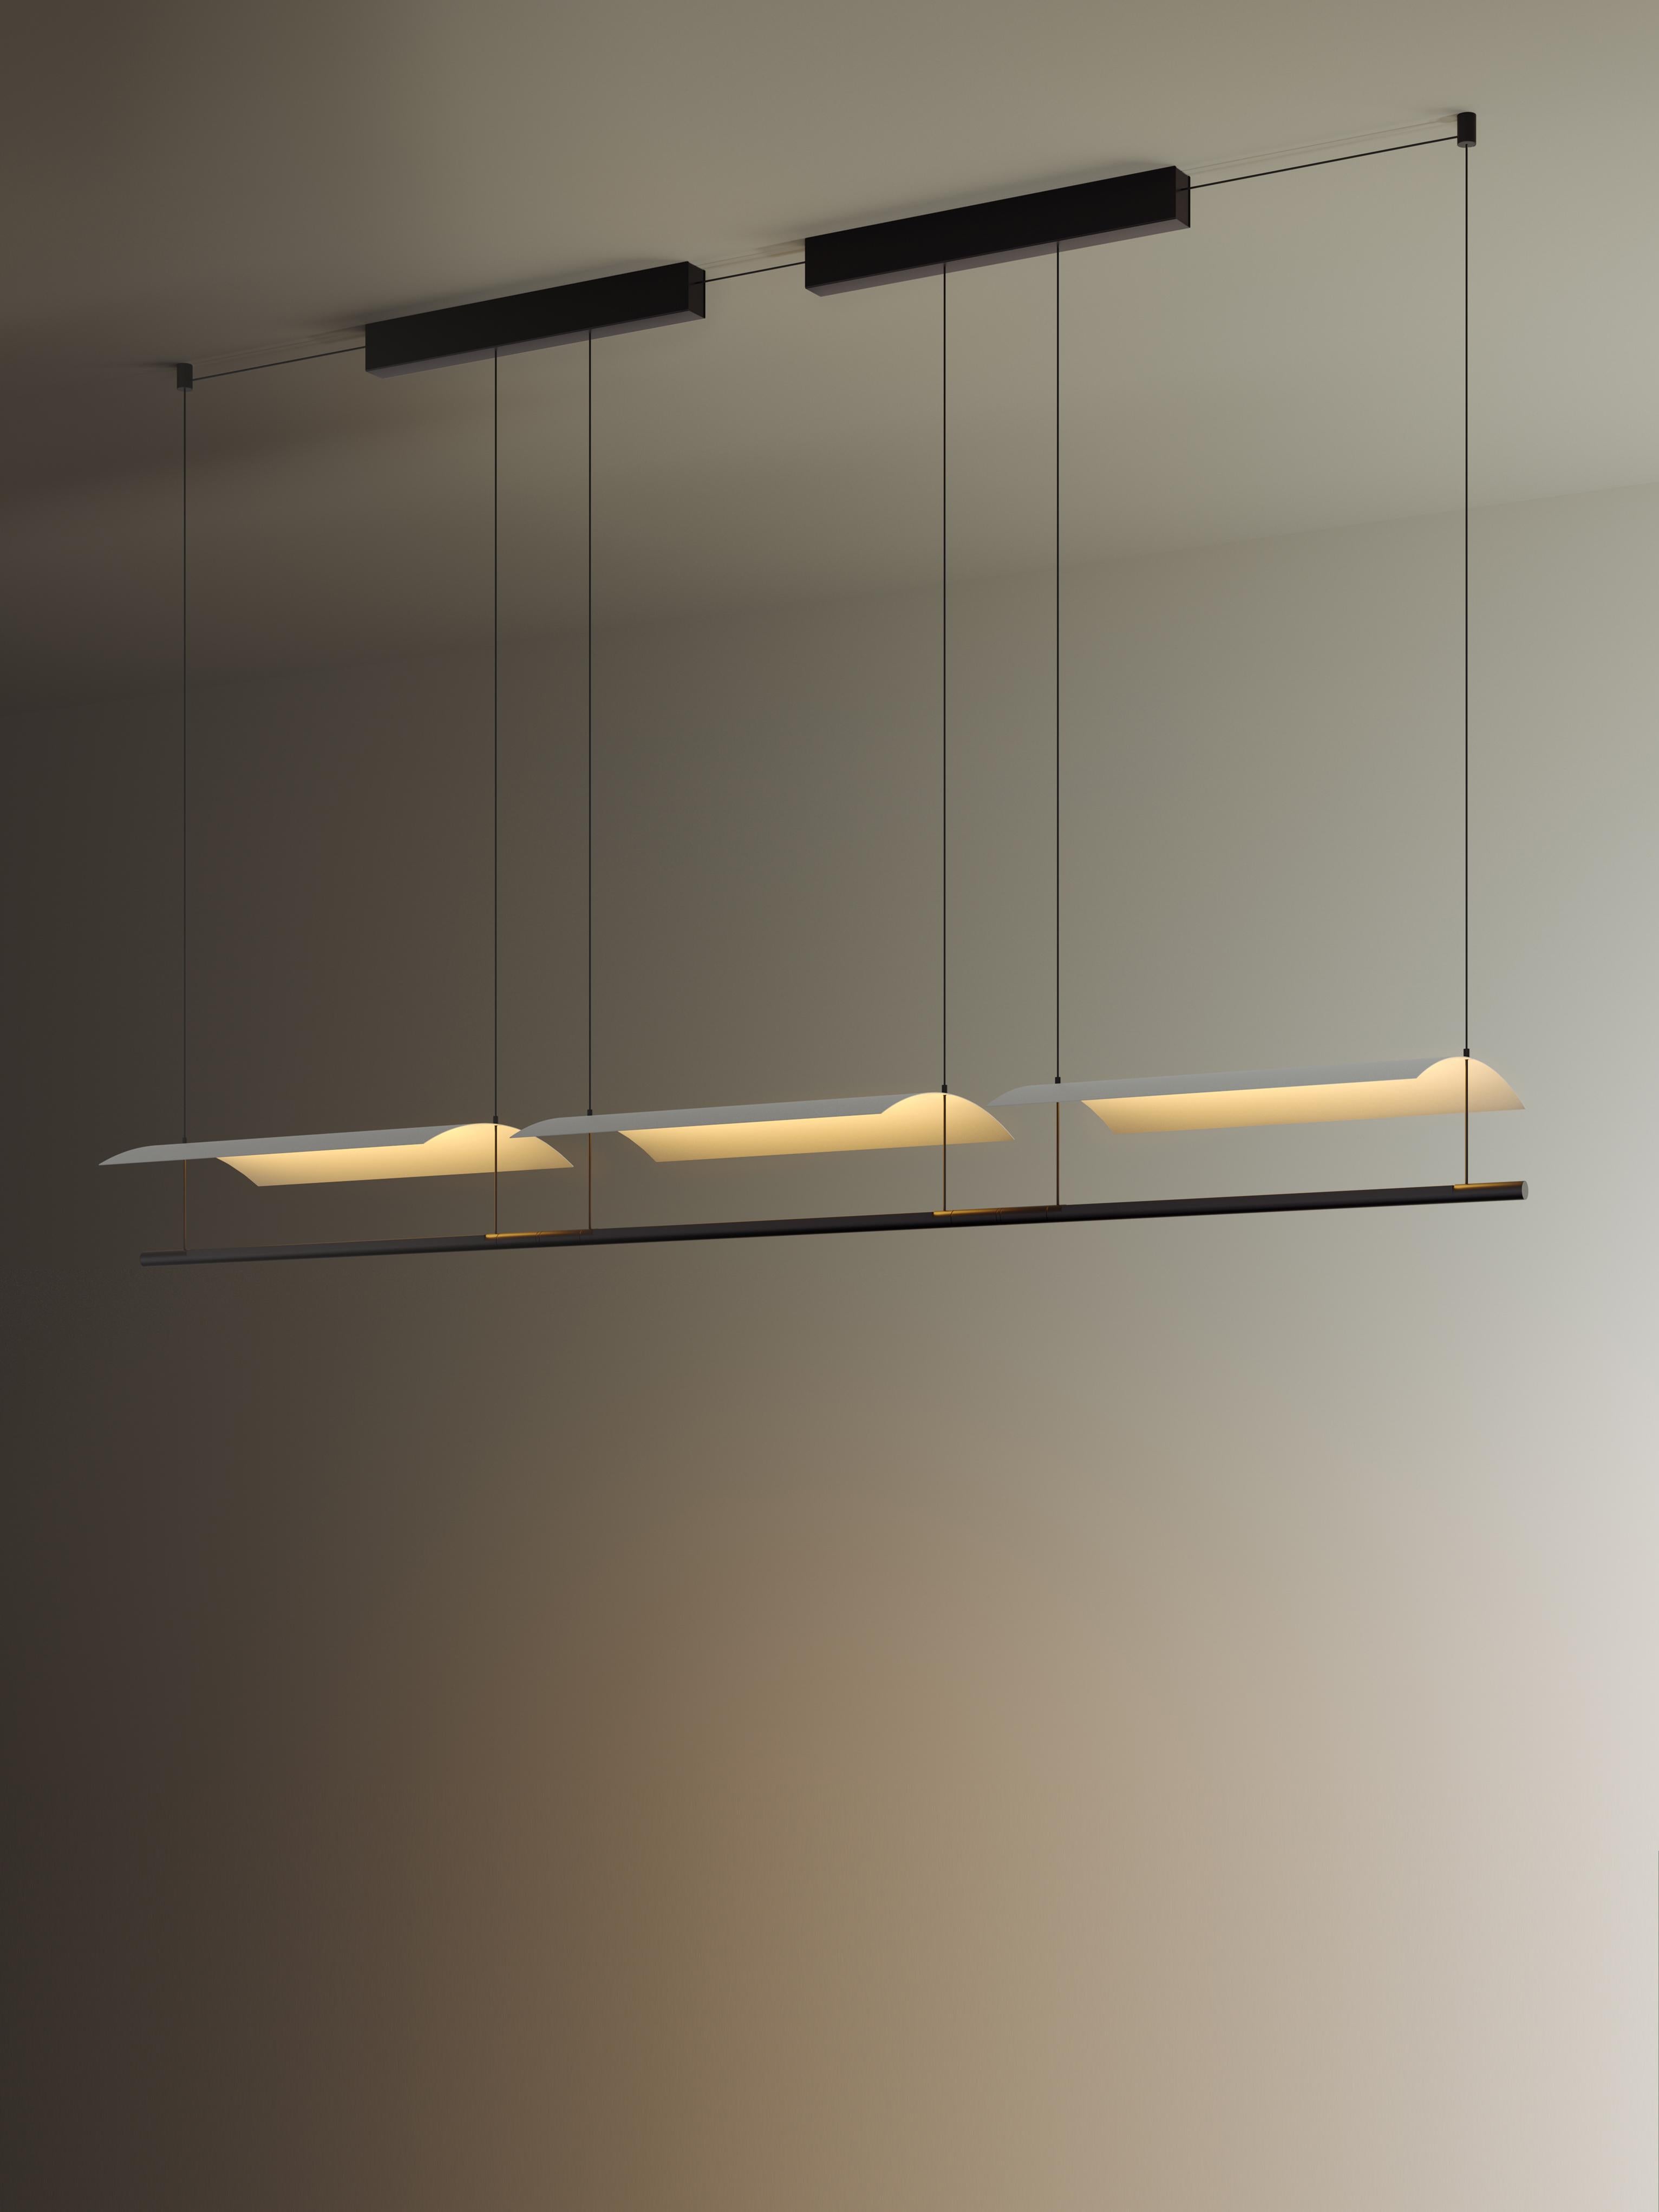 Sistema Lámina 45 pendant lamp II by Antoni Arola
Dimensions: D 177.1 x W 30 x H 12.6 cm
Materials: Metal, plastic.
Available in 2, 3 or 4 modules.

A line of light and a thin metal sheet create a soft but effective levity. A marriage of the